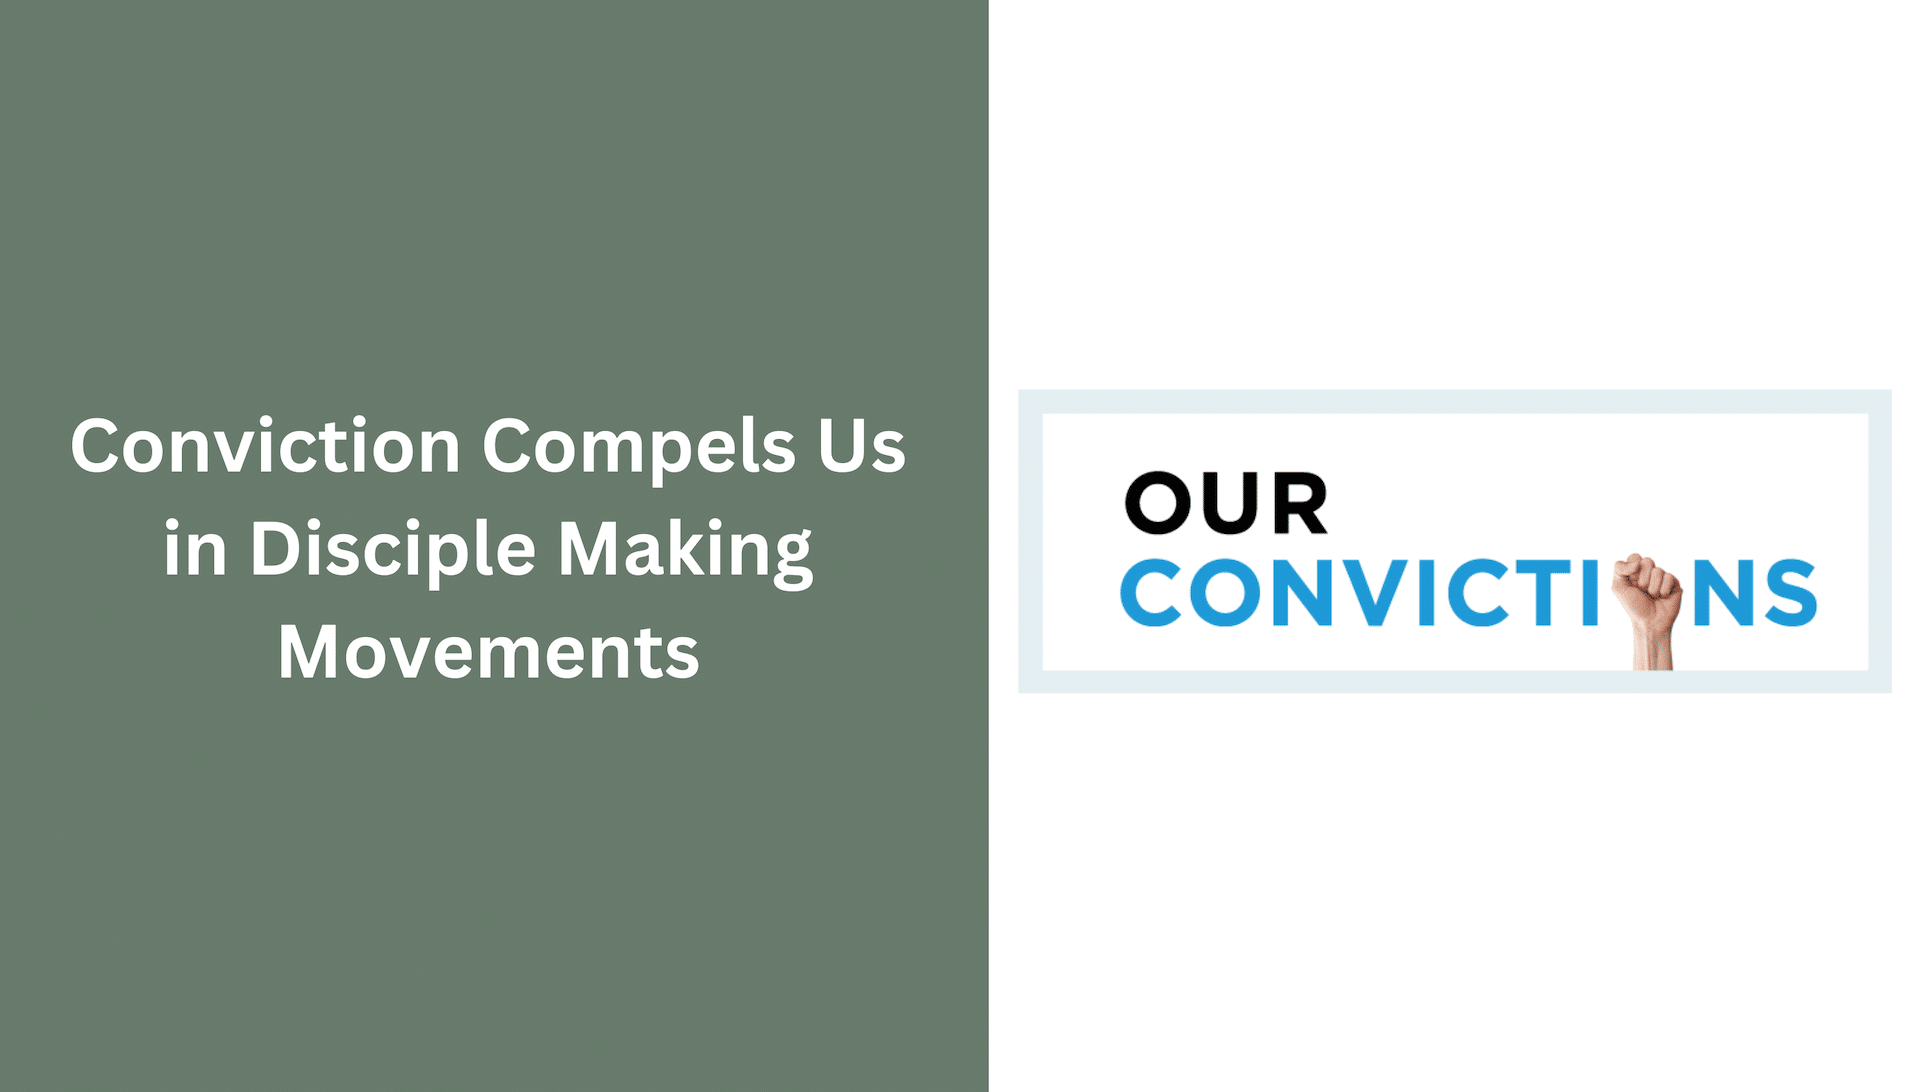 Conviction compels us in disciple making movements